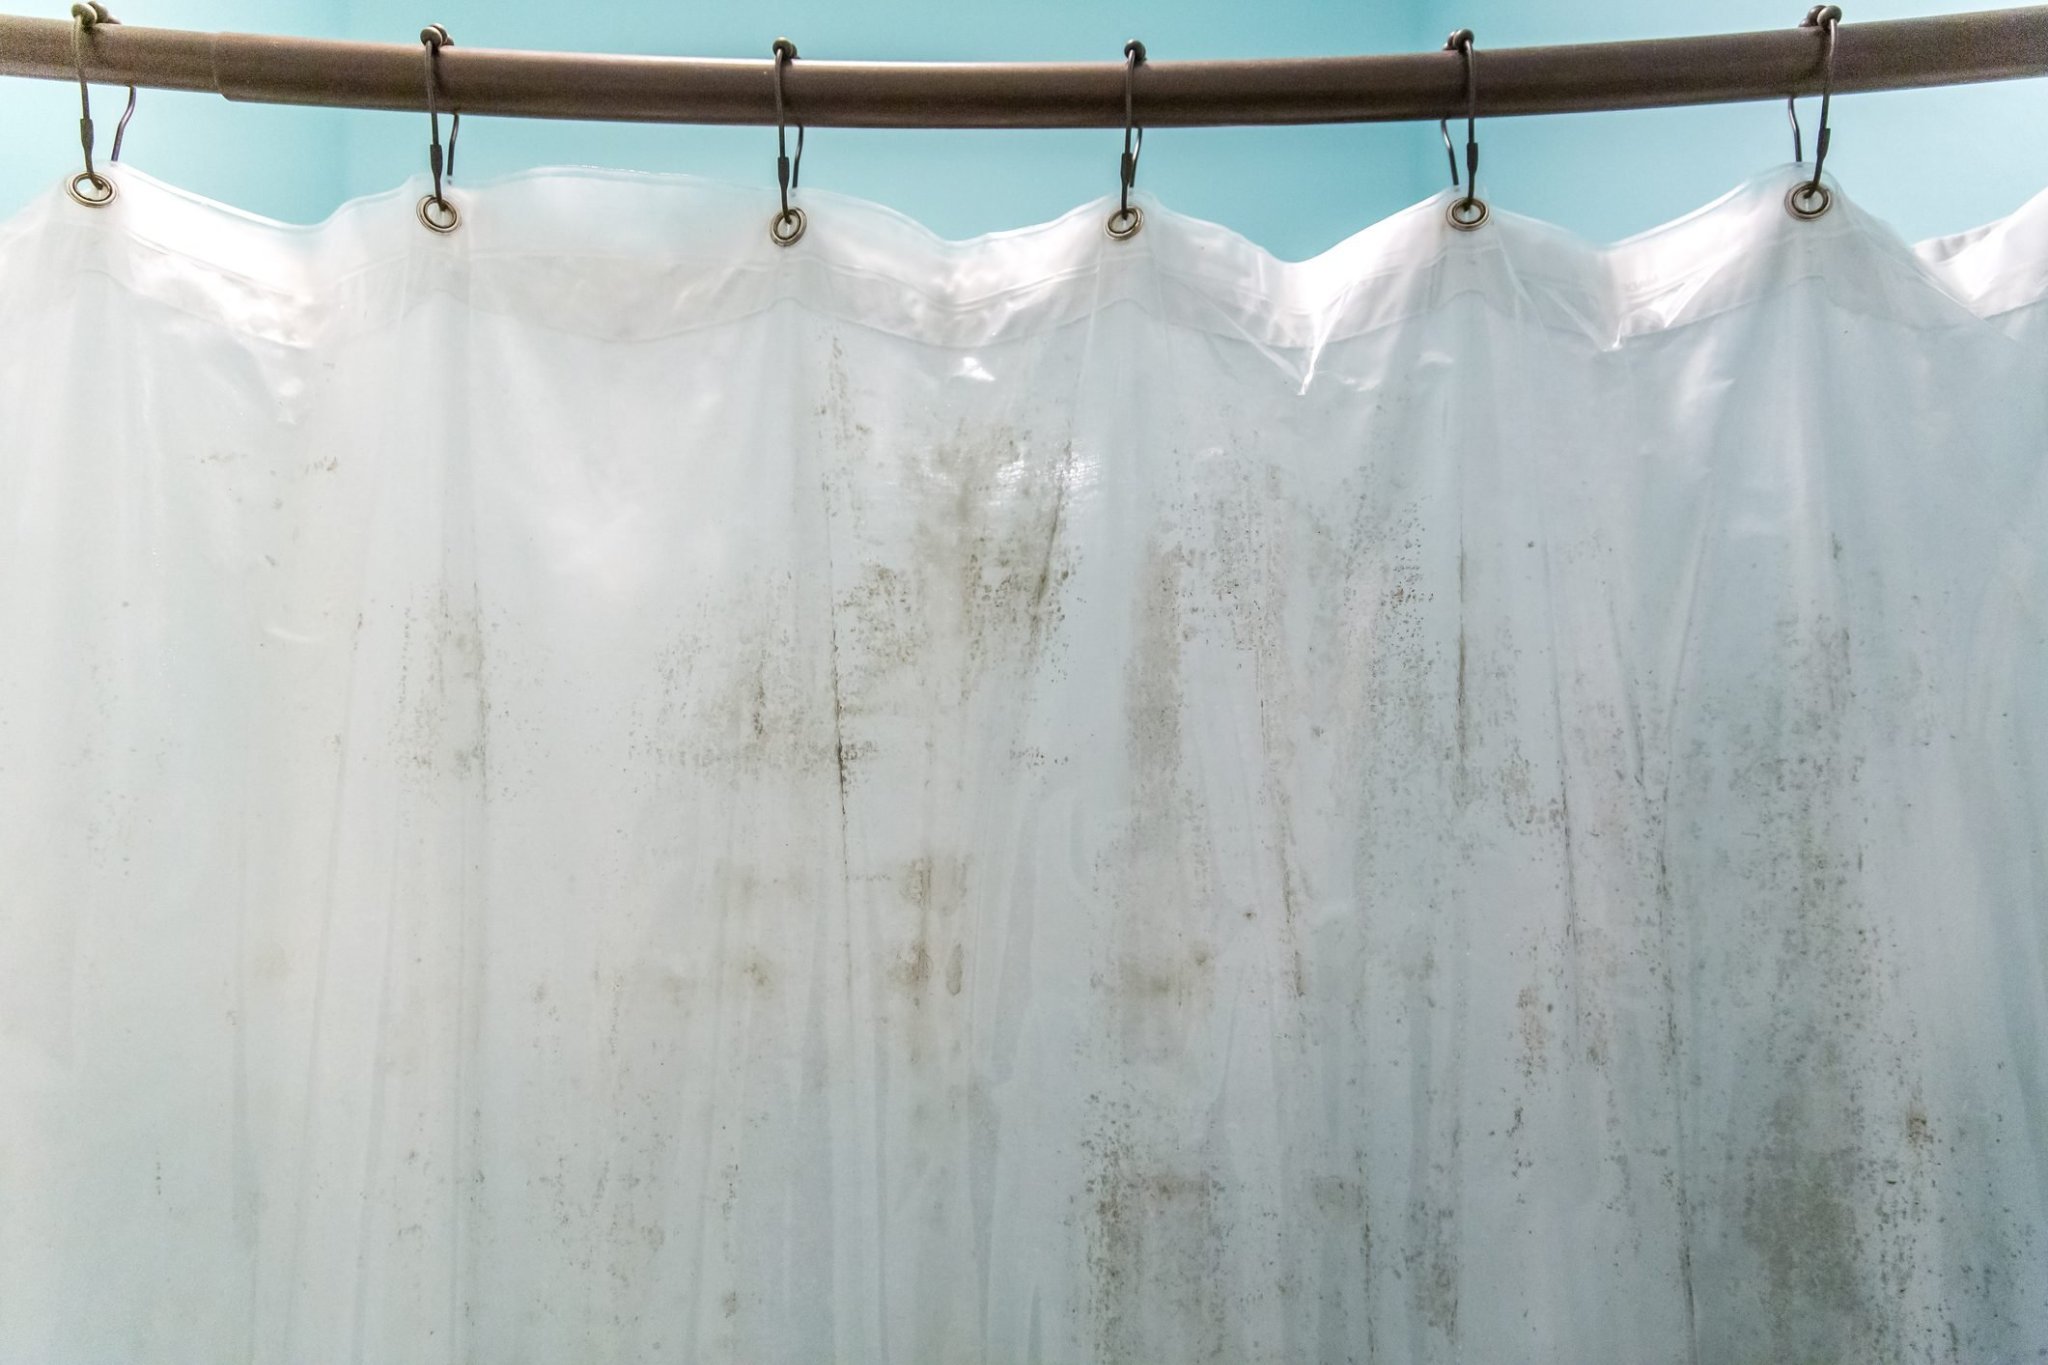 How to Clean Your Shower Curtain and Liner